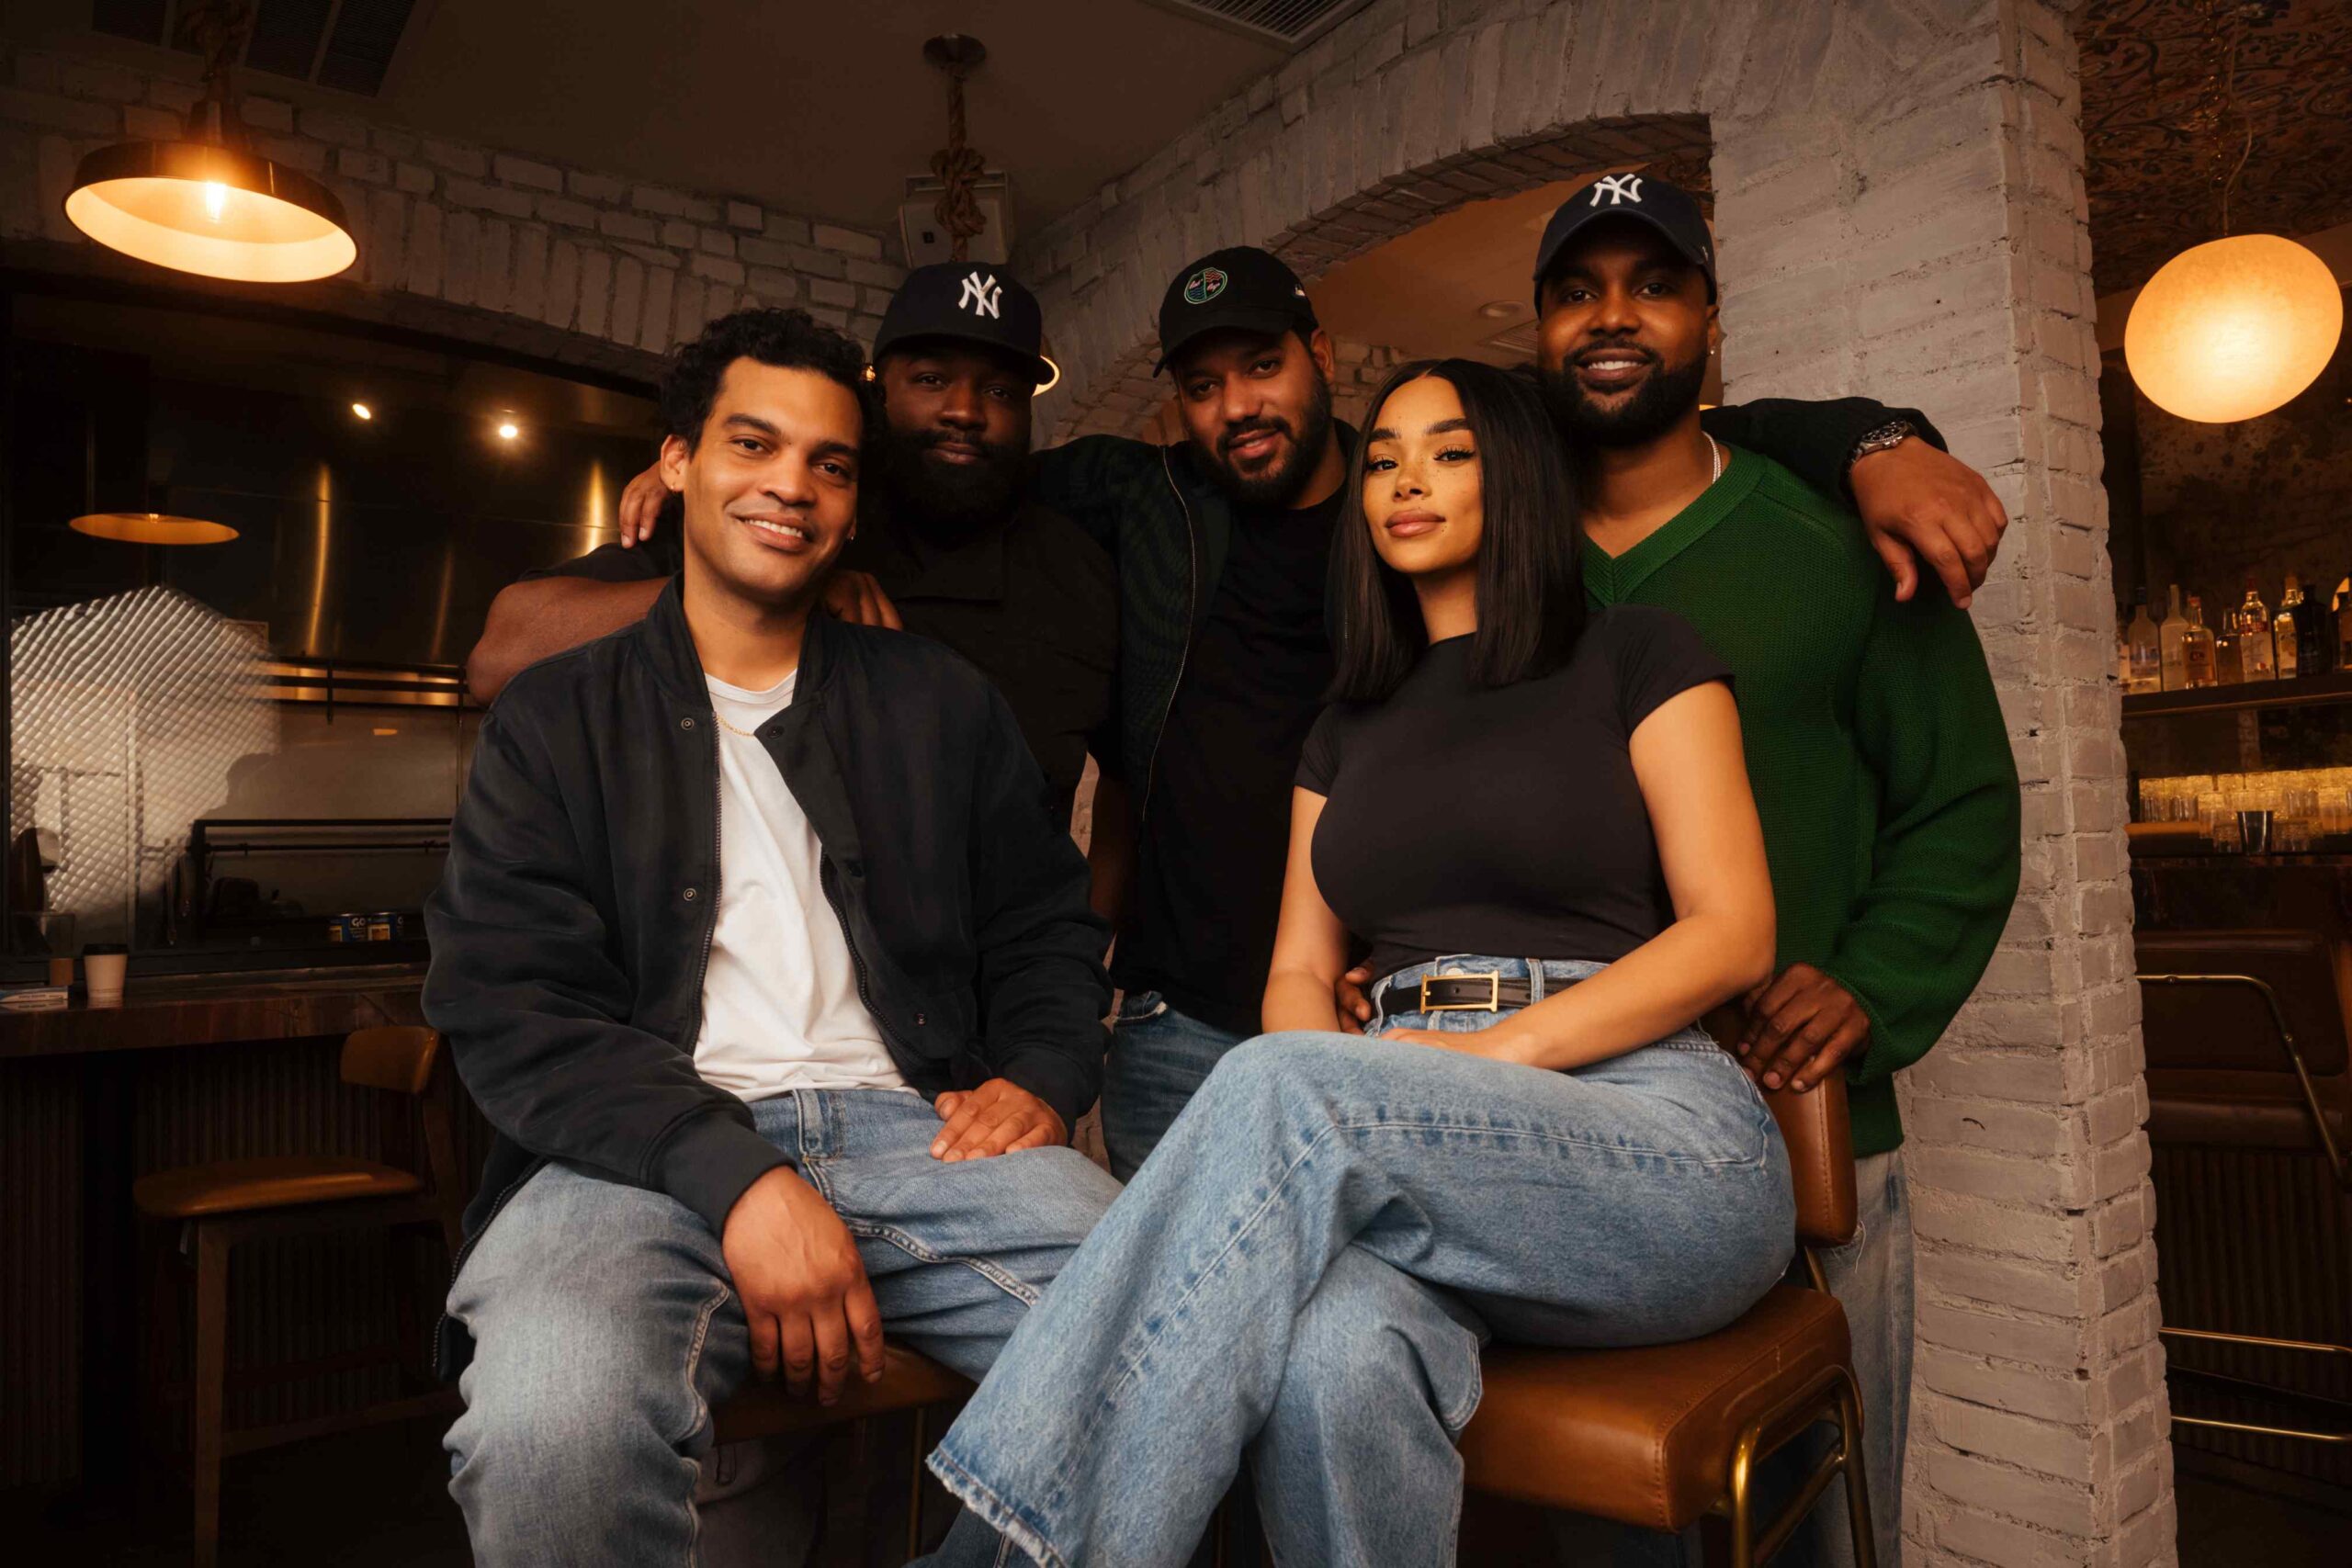 Linden, Hollywood's New Black-Owned Restaurant From Steelo Brim, Alahna Jade And More, Is Bringing The Taste Of The Big Apple To The West Coast